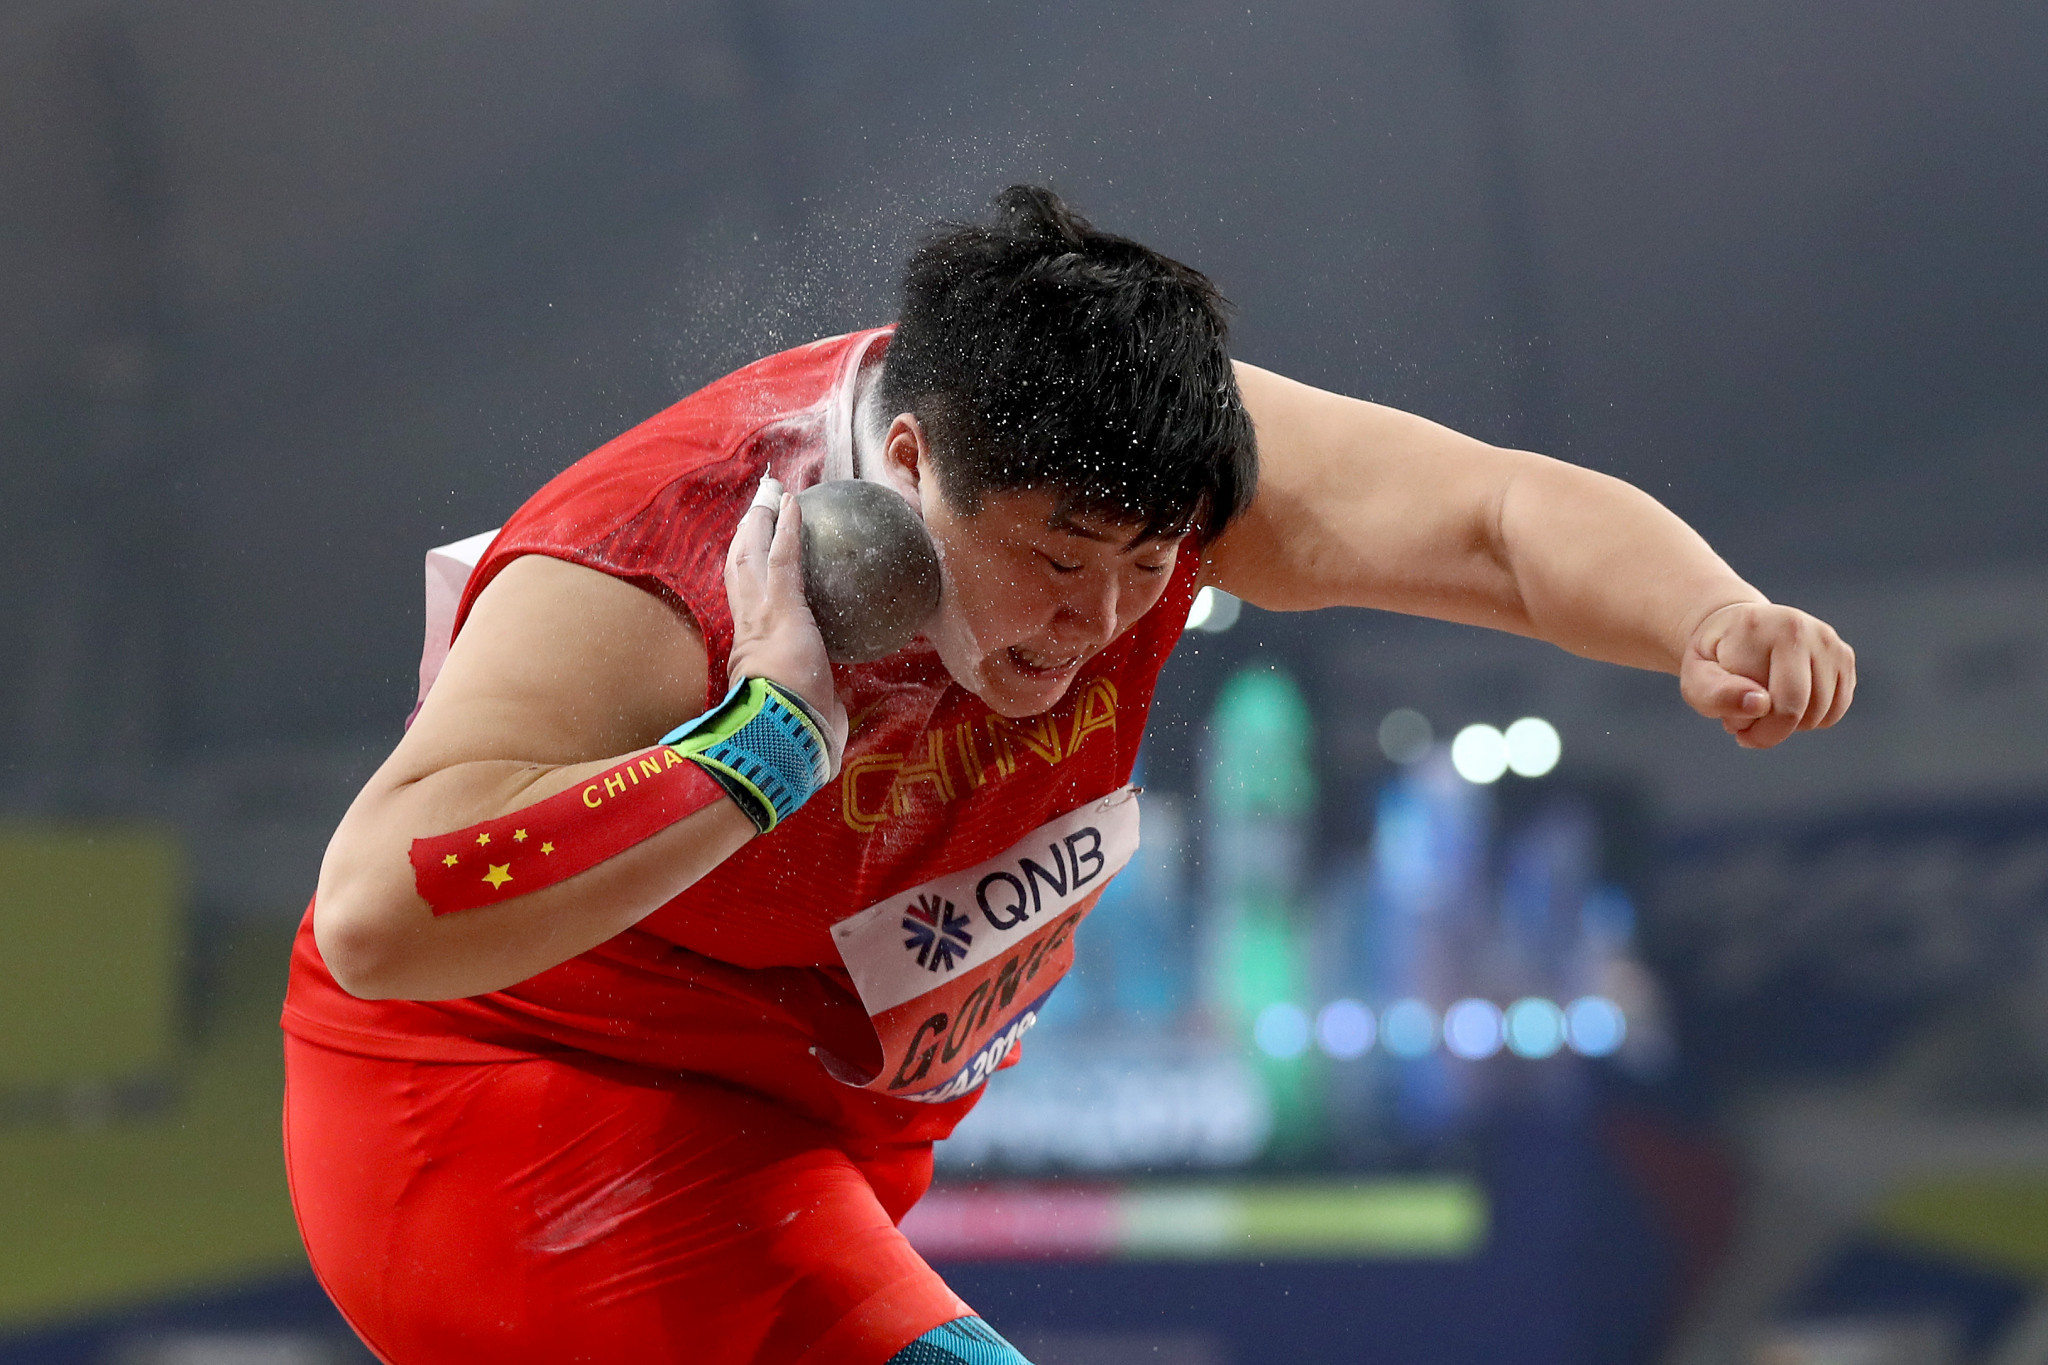 Gong Lijiao of China says she is still aiming for Olympic gold in shot put despite the postponement of Tokyo 2020 ©Getty Images